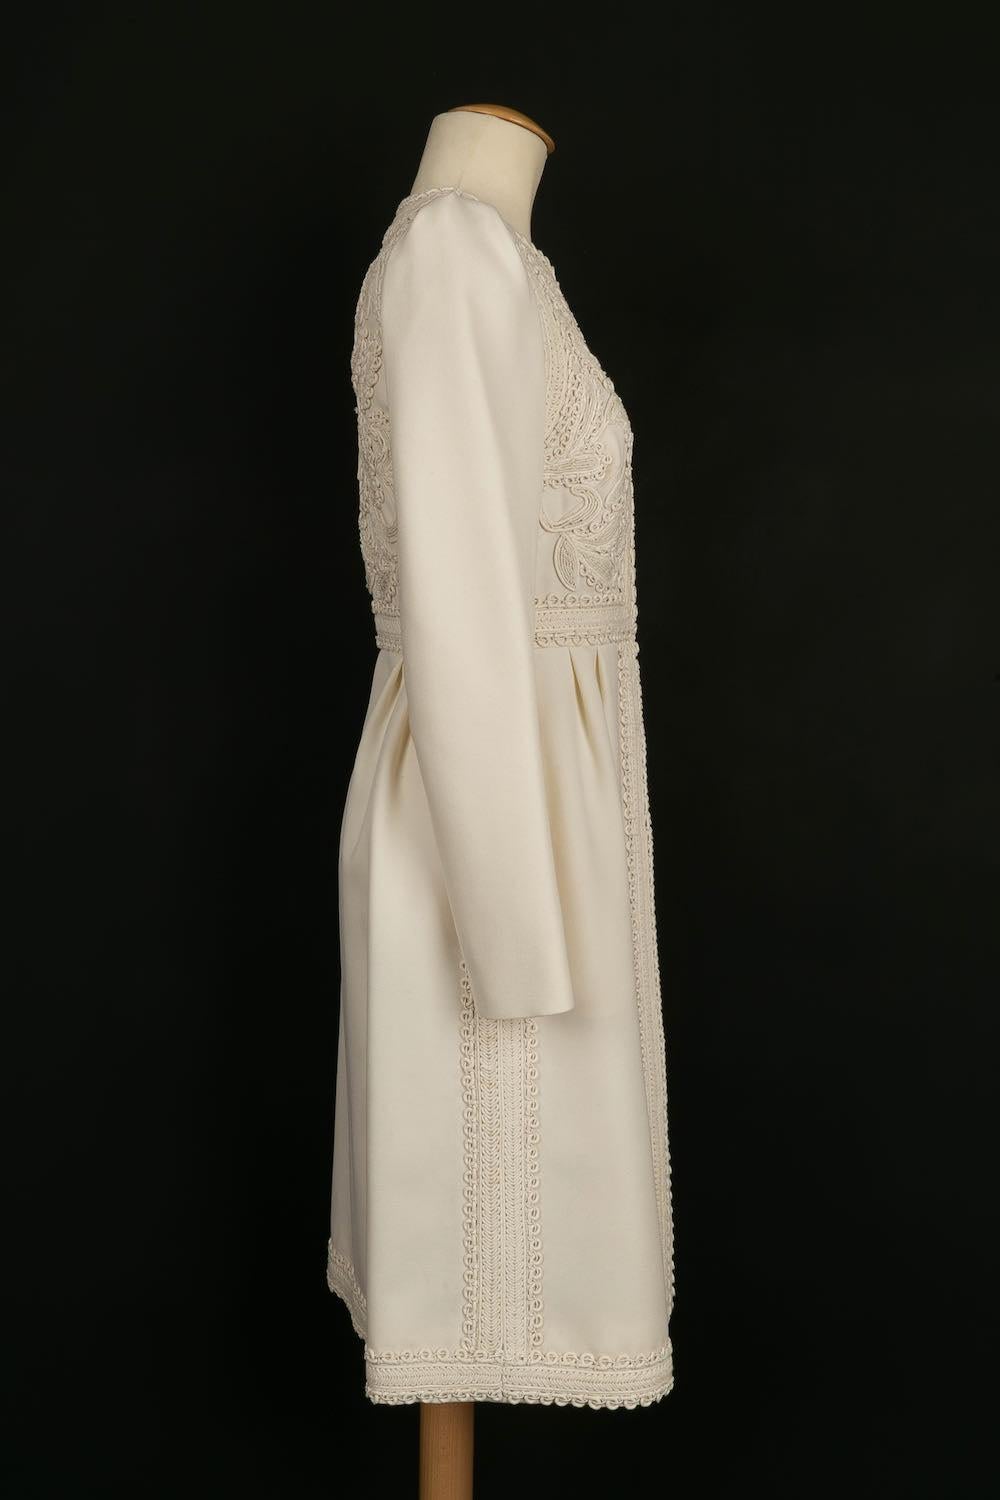 Valentino -(Made in Italy) Embroidered coat in white ecru. Size 40IT, it fits a 36FR.

Additional information: 
Dimensions: Shoulder width: 38 cm, Chest: 41 cm, Waist: 35 cm, Sleeve length: 64 cm, Length: 110 cm
Condition: Very good condition
Seller